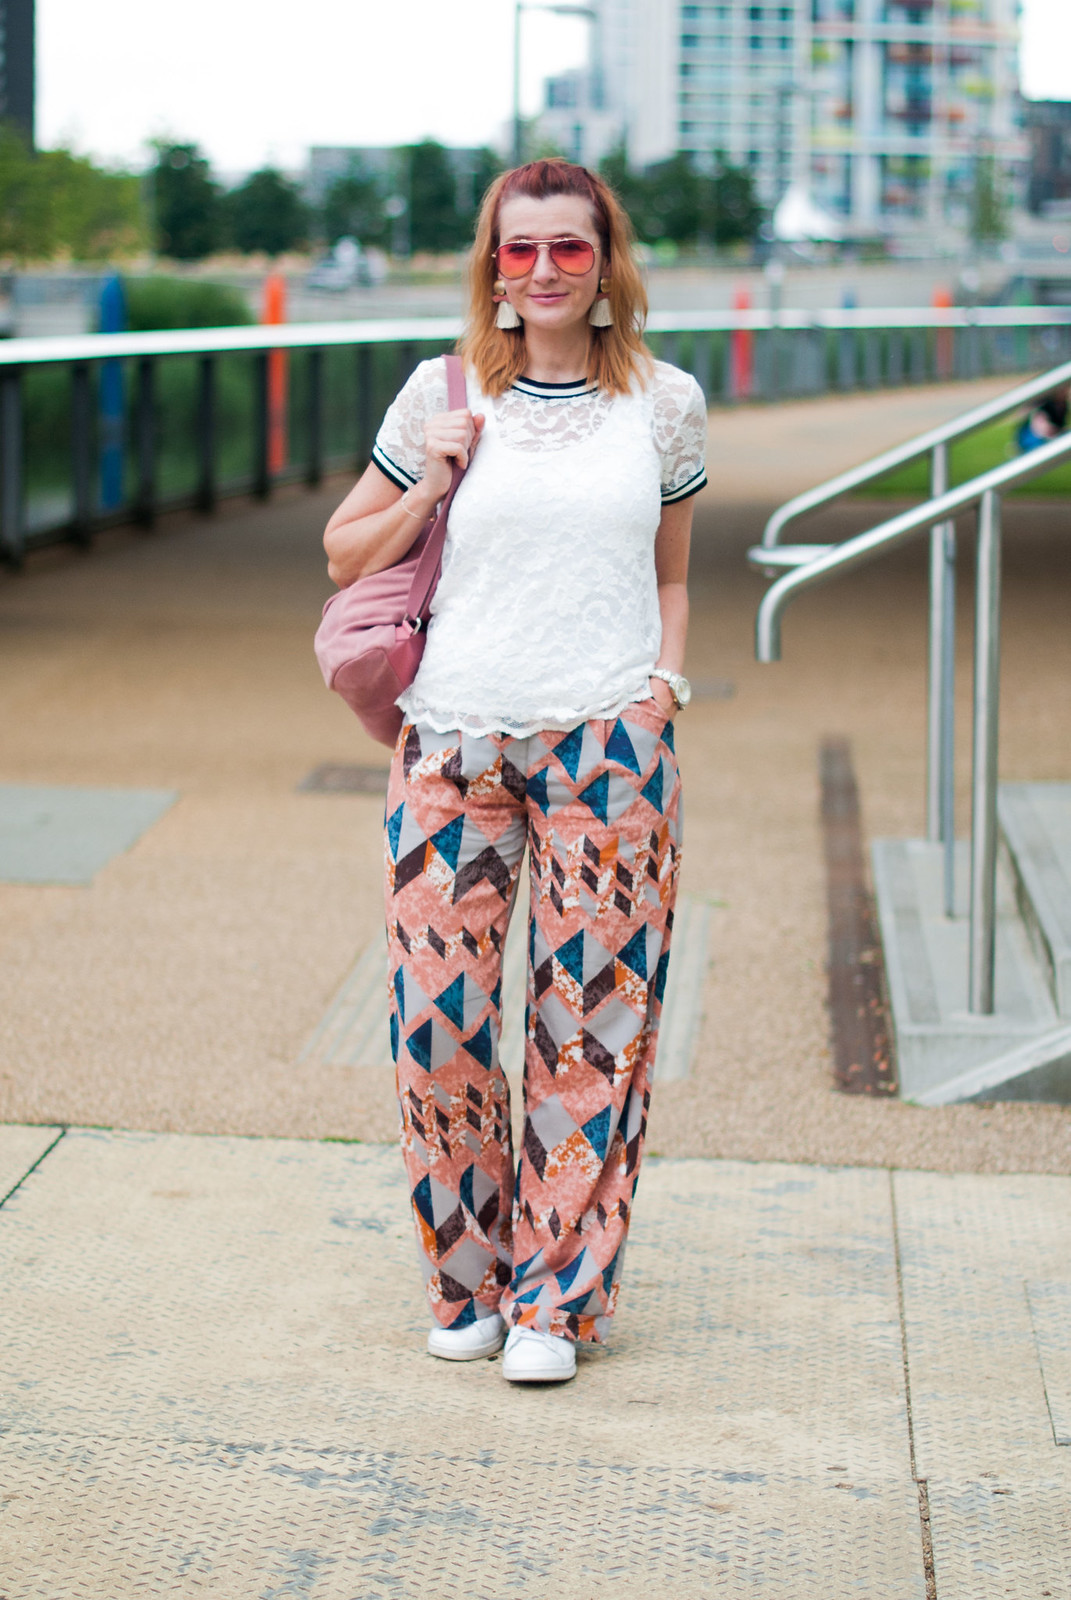 Bold, colourful summer dressing: White lace top pyjama-style patterned trousers pants white Stan Smiths statement tassel earrings orange aviators pink suede backpack | Not Dressed As Lamb, over 40 style blog